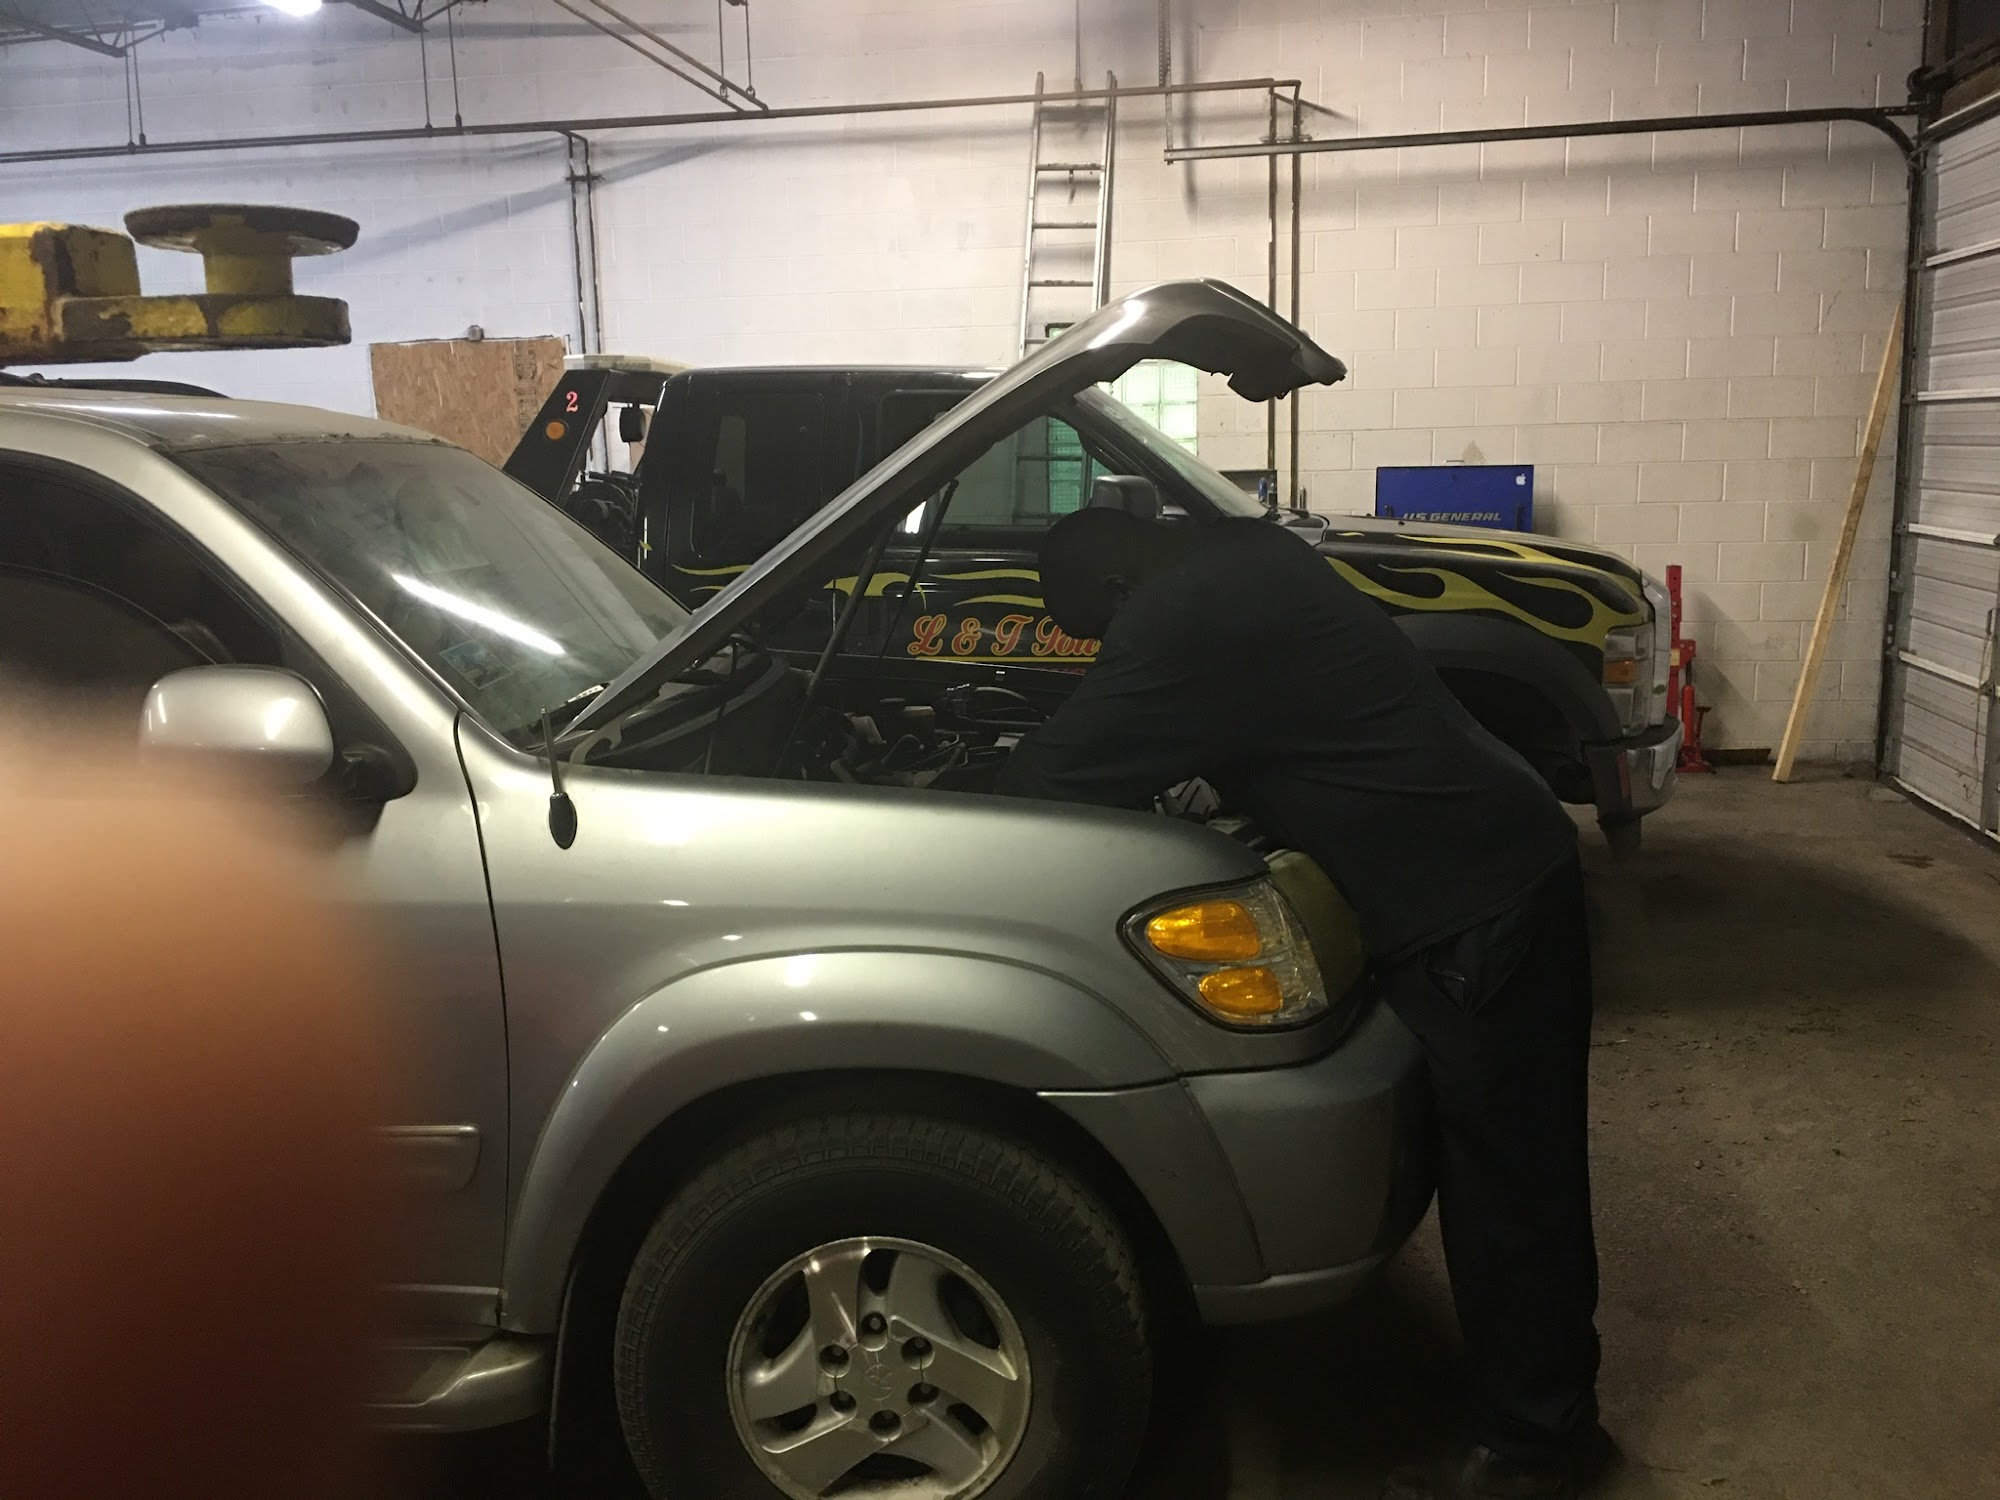 L & T Auto Repairs 14150 S Indiana Ave, Riverdale Illinois 60827